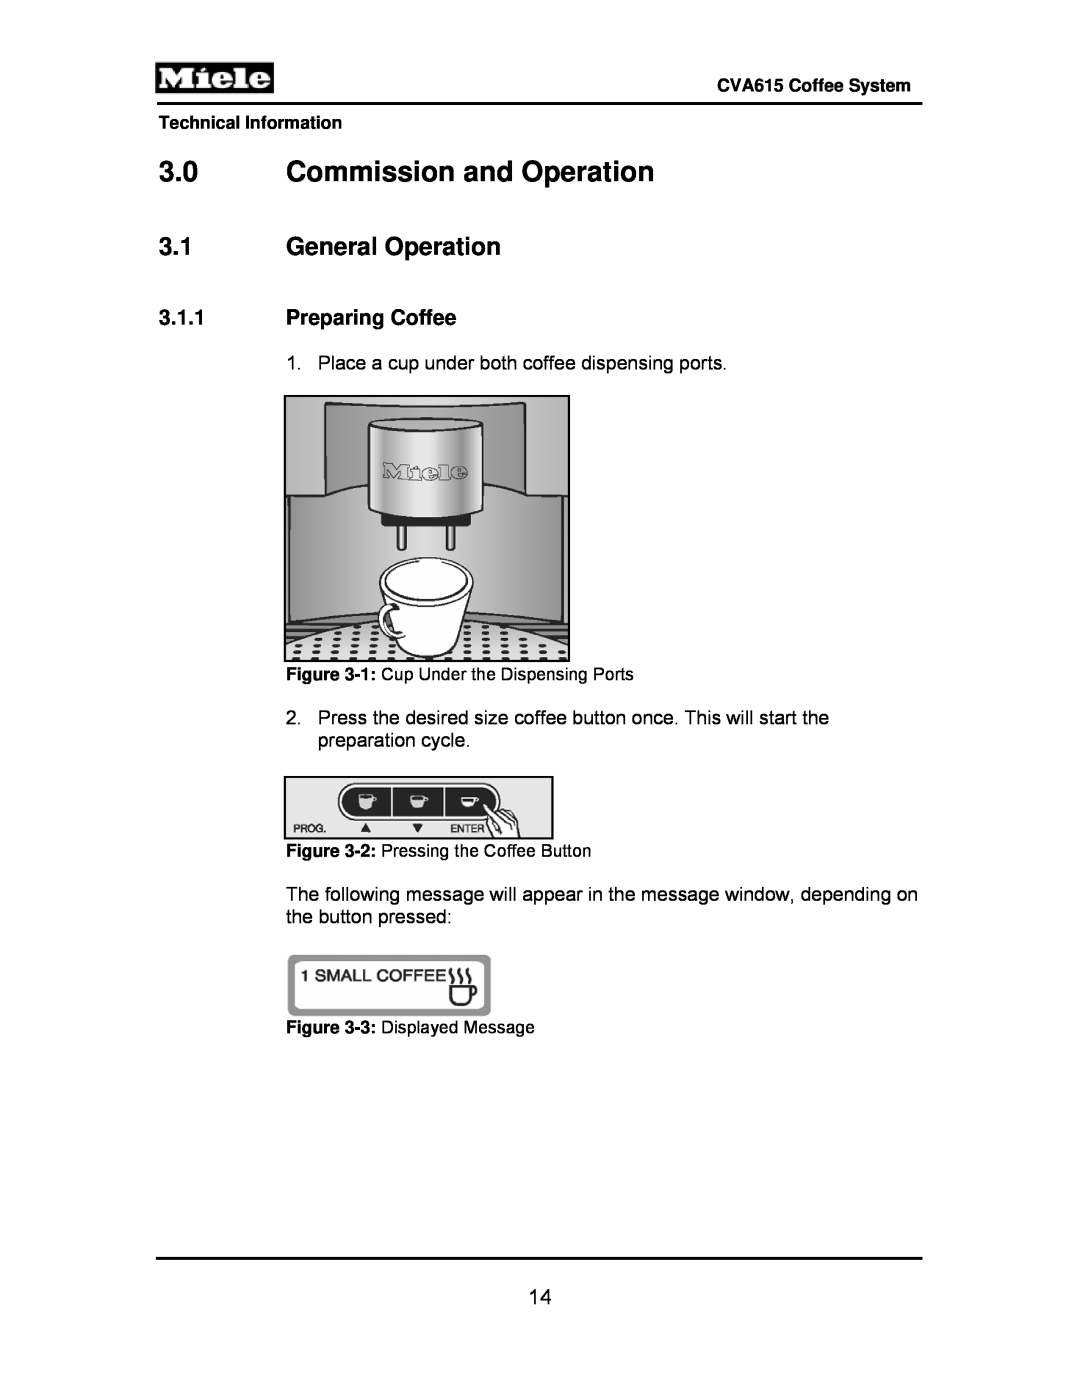 Miele CVA615 manual 3.0Commission and Operation, 3.1General Operation 